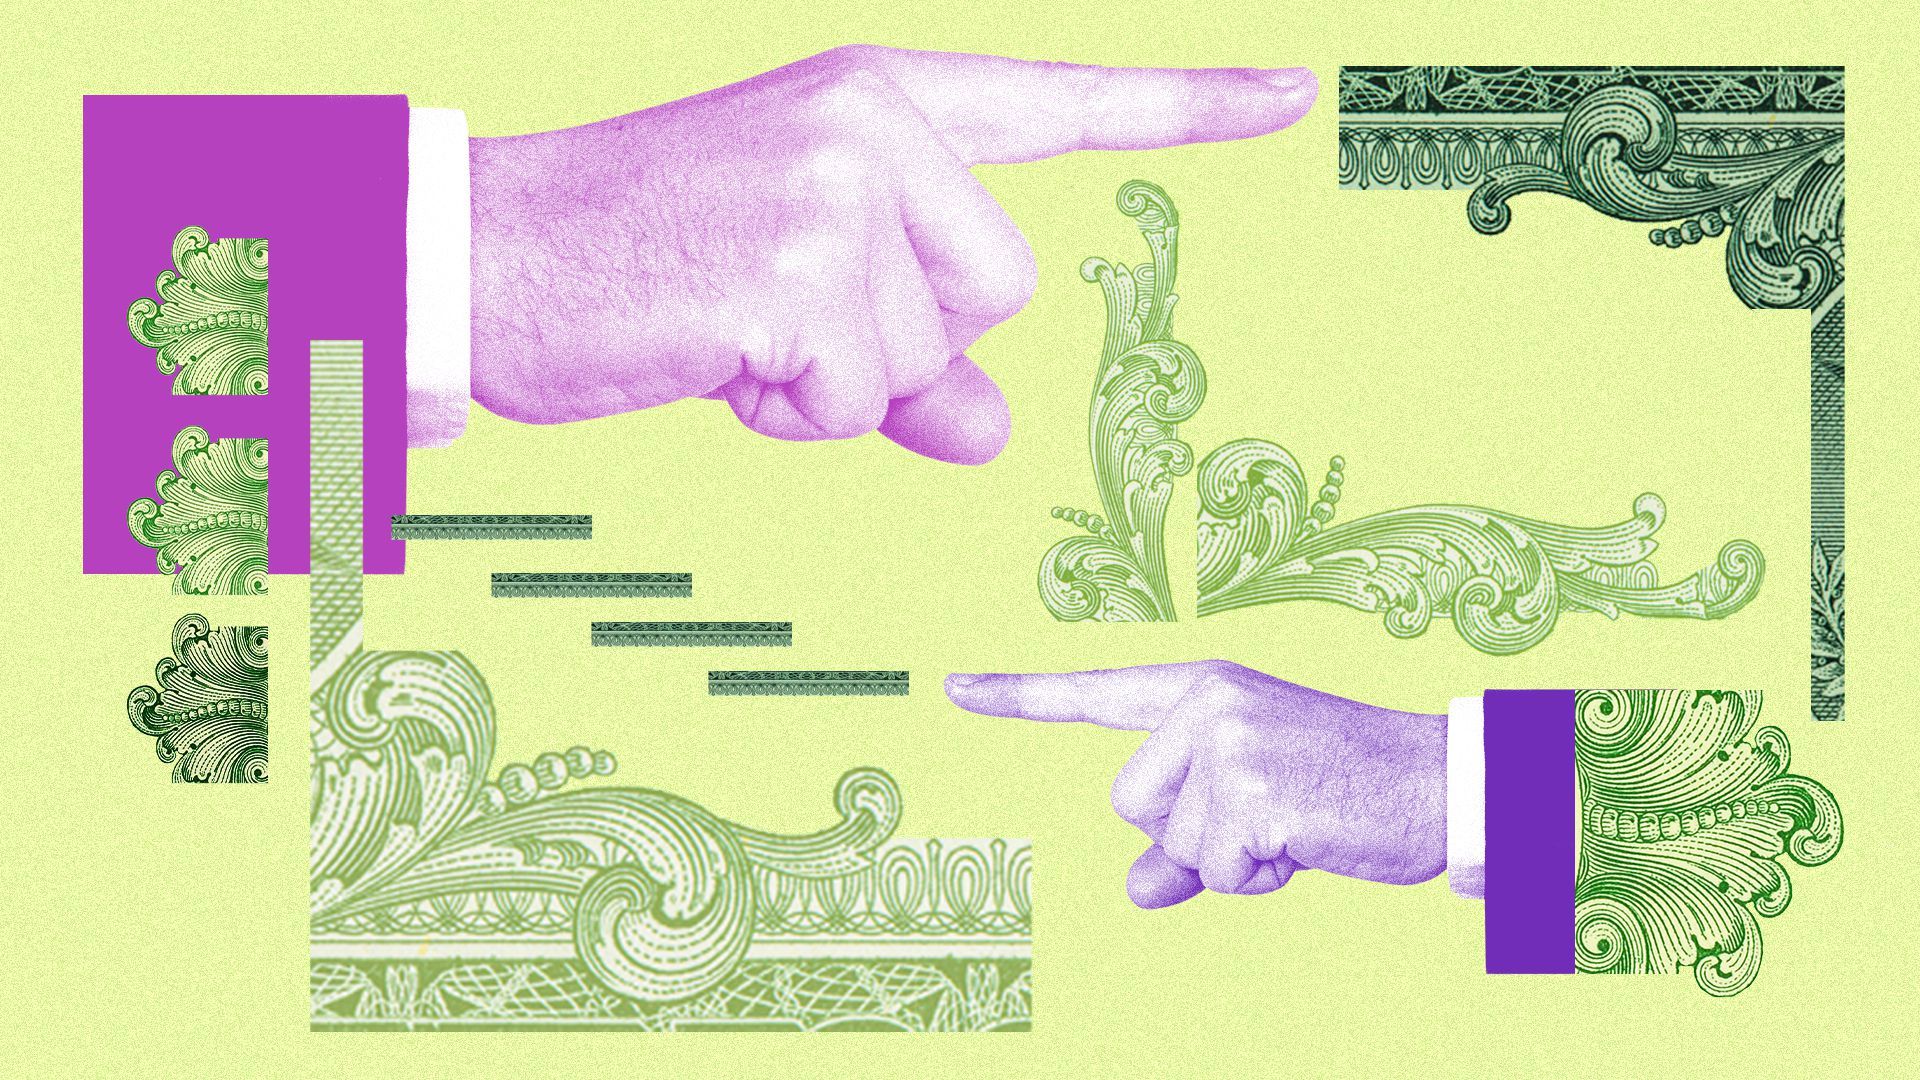 Illustration of hands pointing at one another, collaged with money elements.